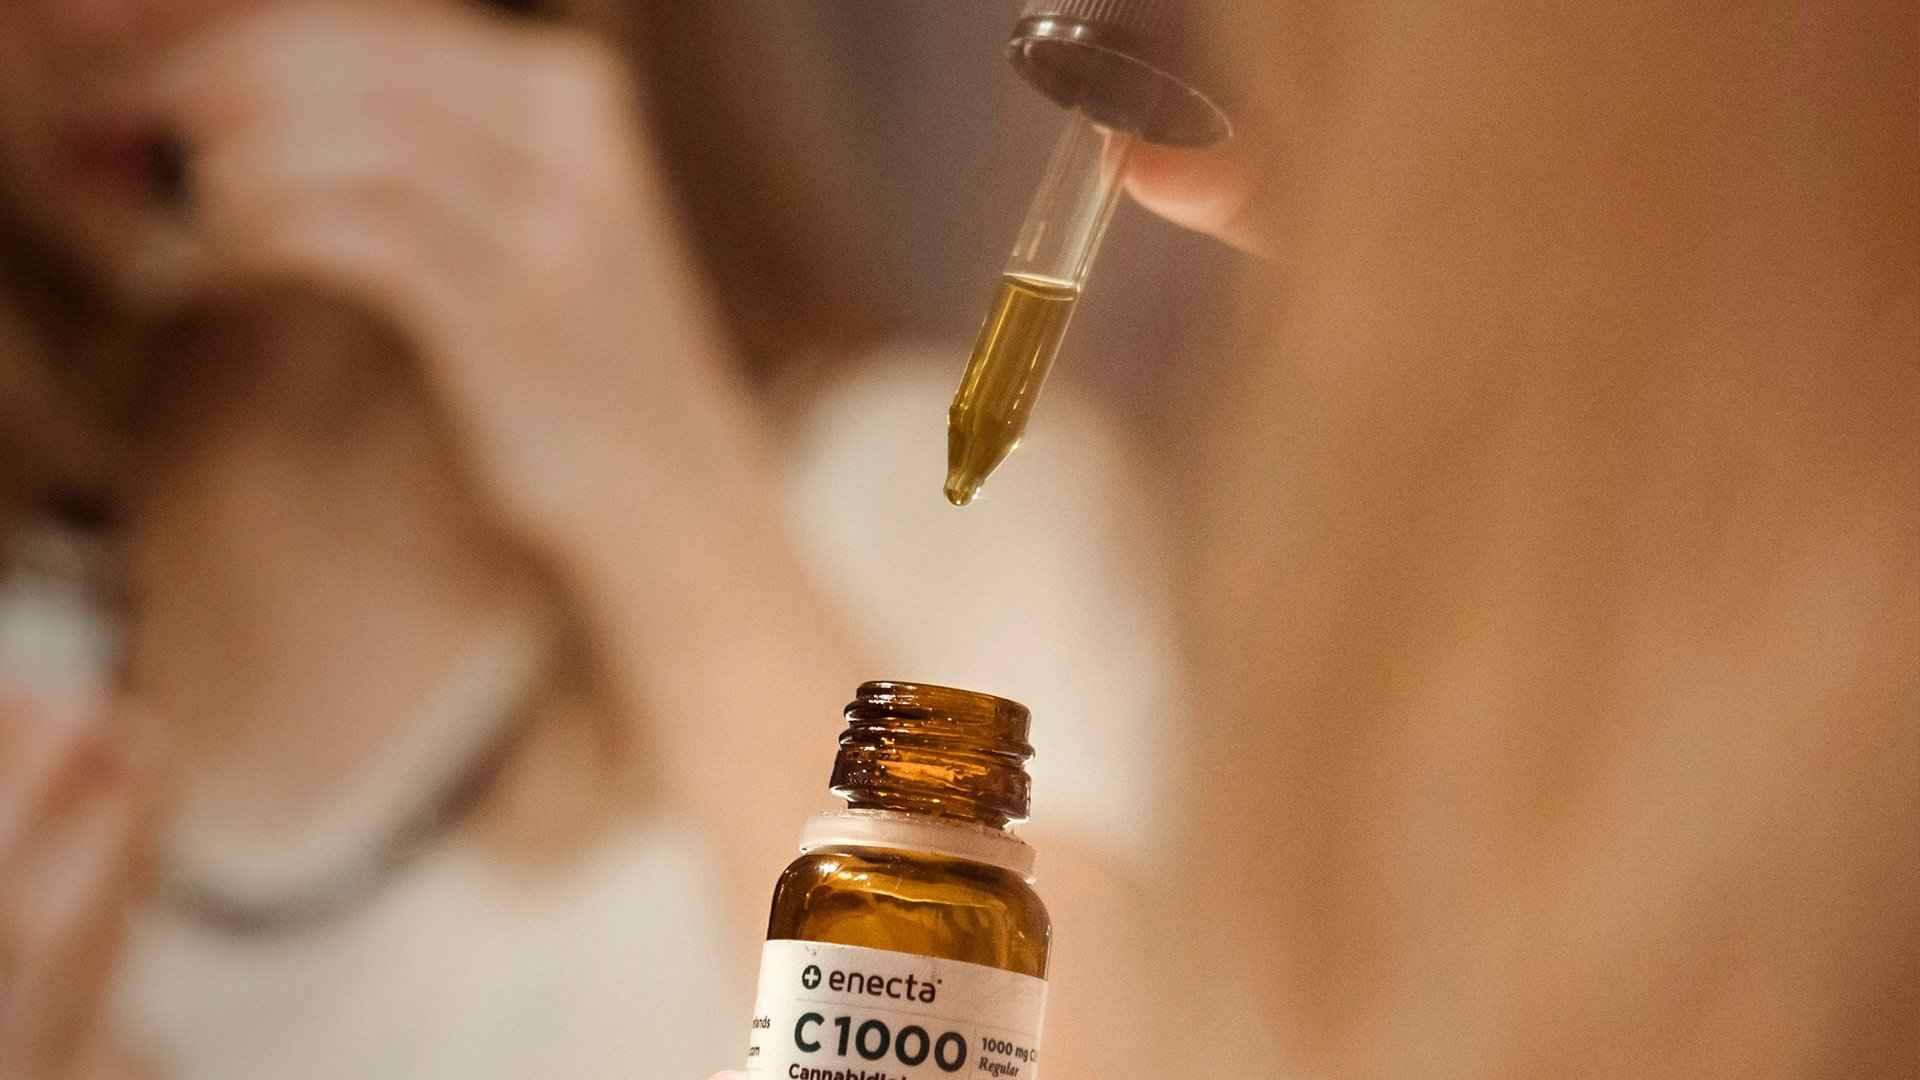 Hemp Oil and its uses